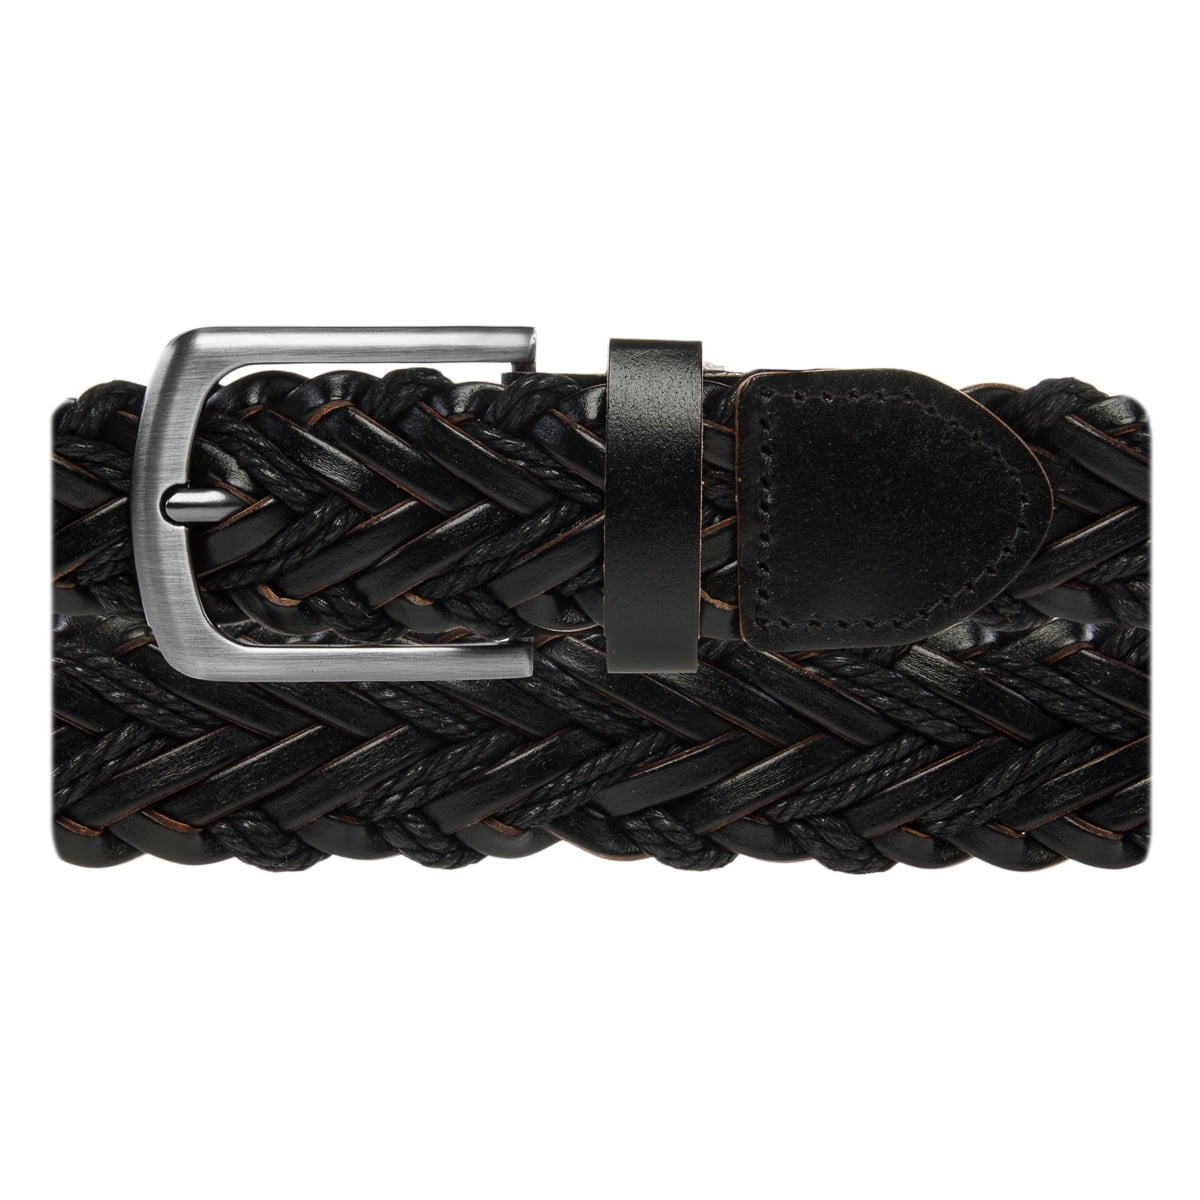 Men’s Braided Leather Belt For Dress Work Or Casual Brushed Finish Metal Buckle 